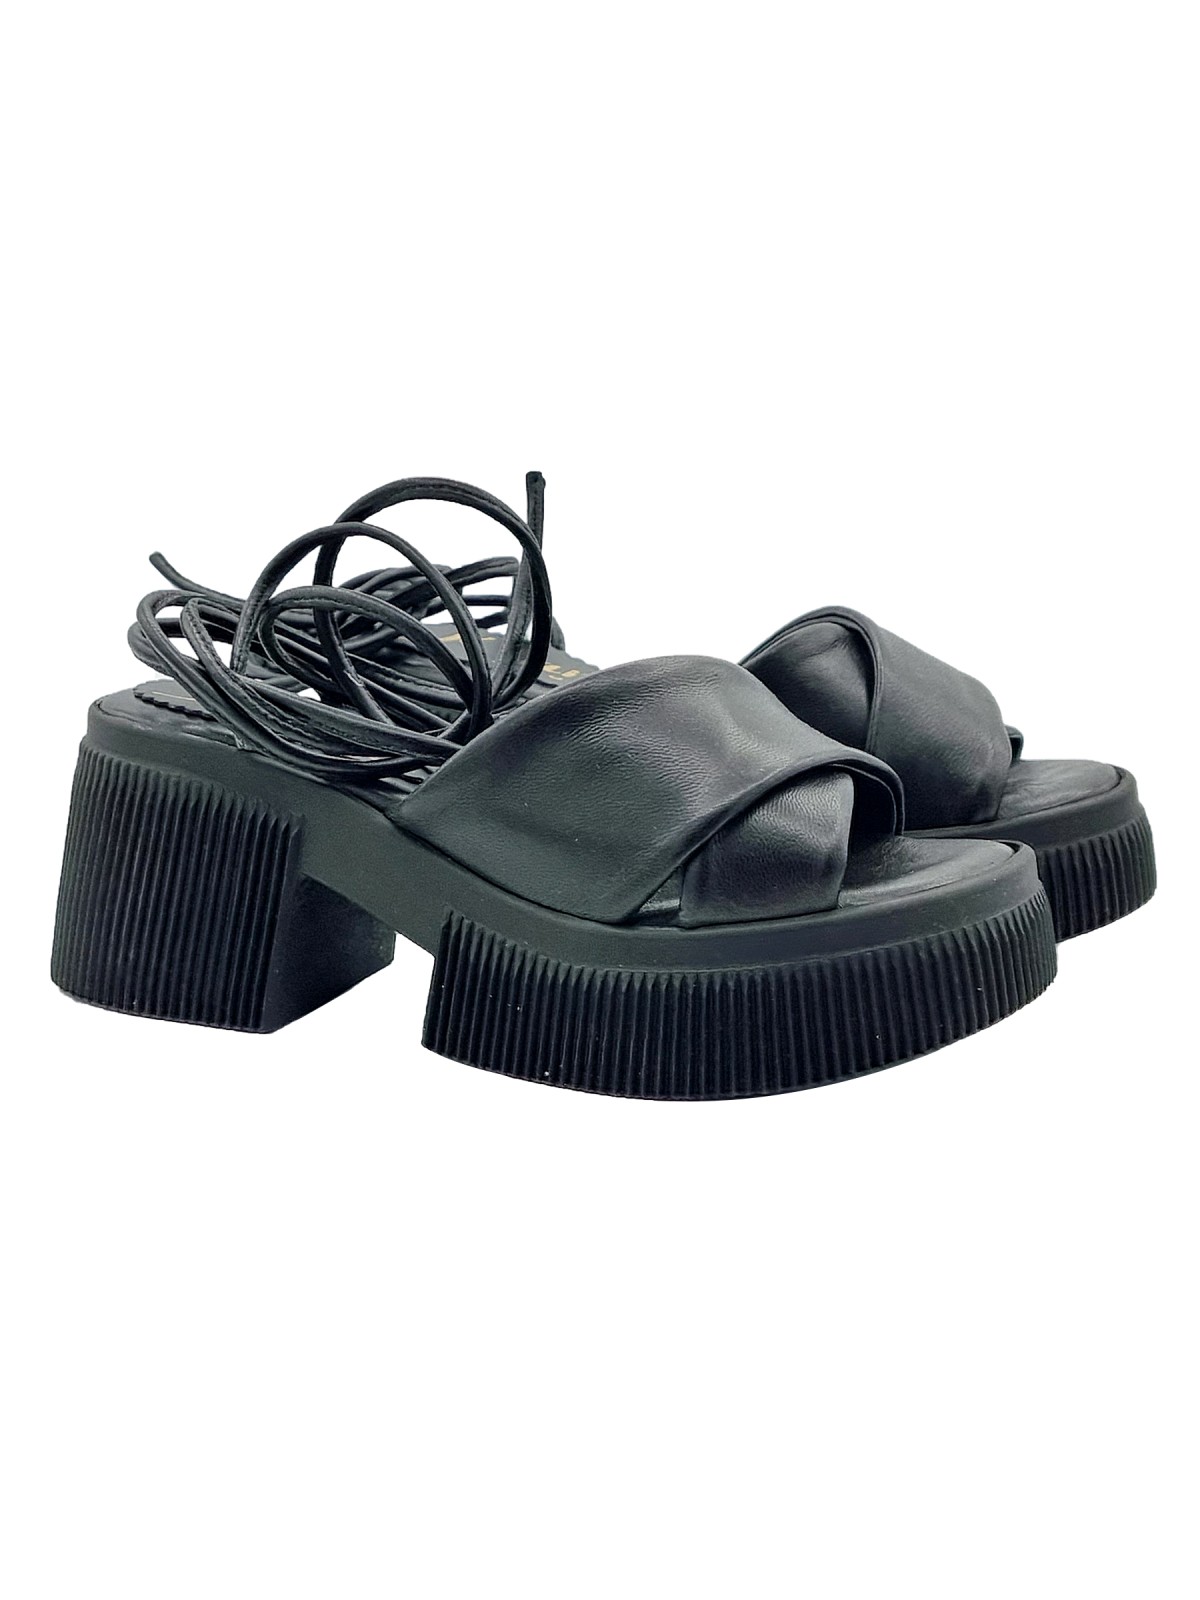 BLACK LEATHER SANDALS WITH LACES